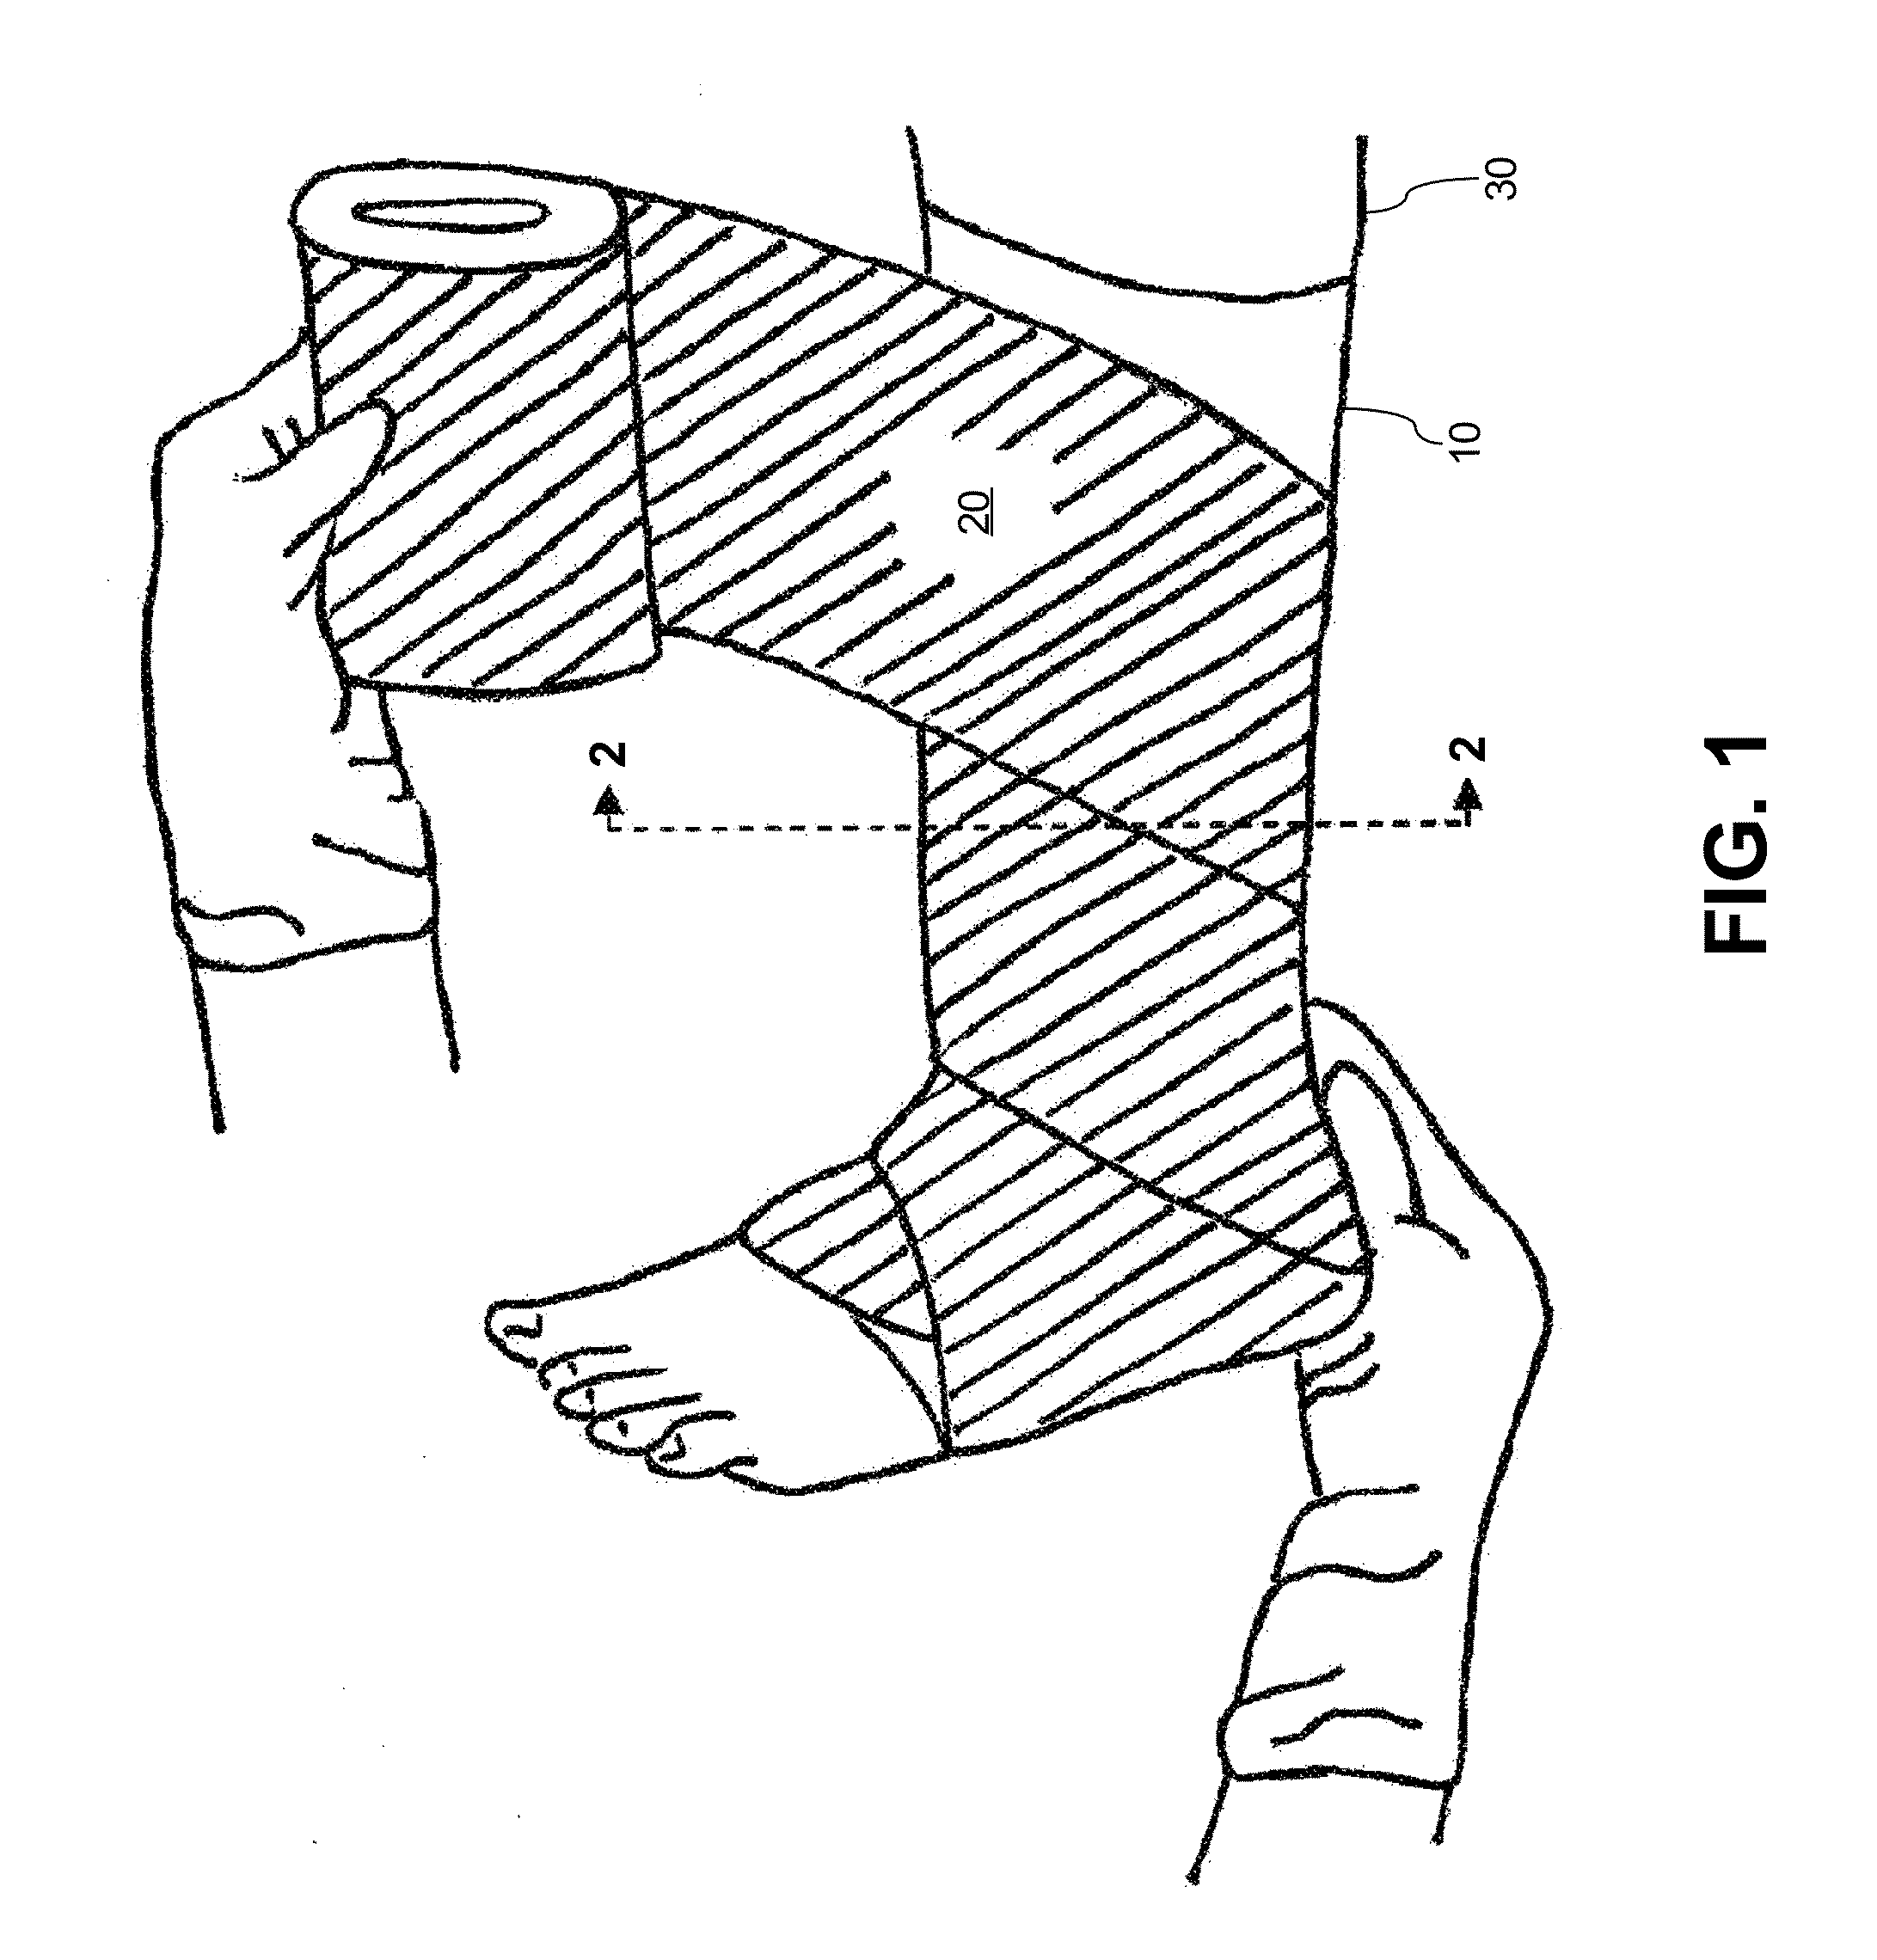 System and method for treating leg ulcers